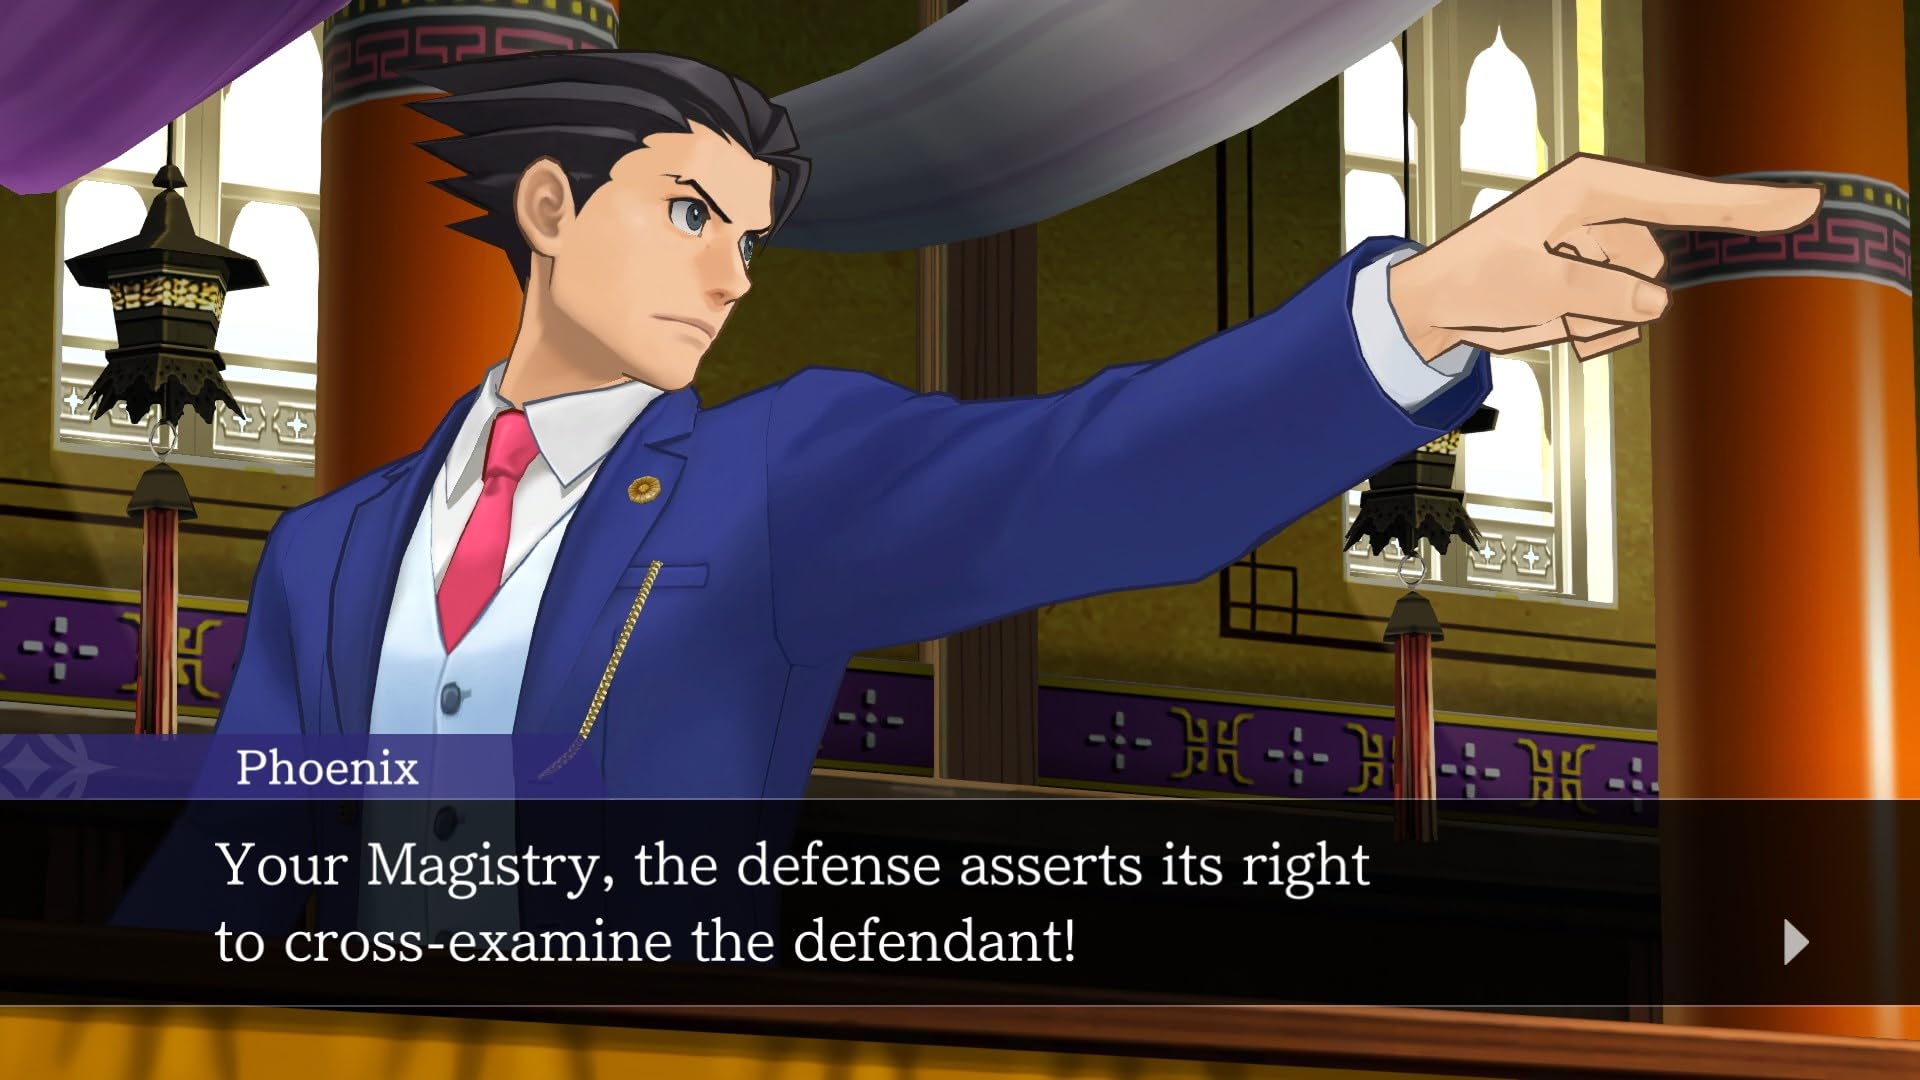 Apollo Justice: Ace Attorney Trilogy Switch